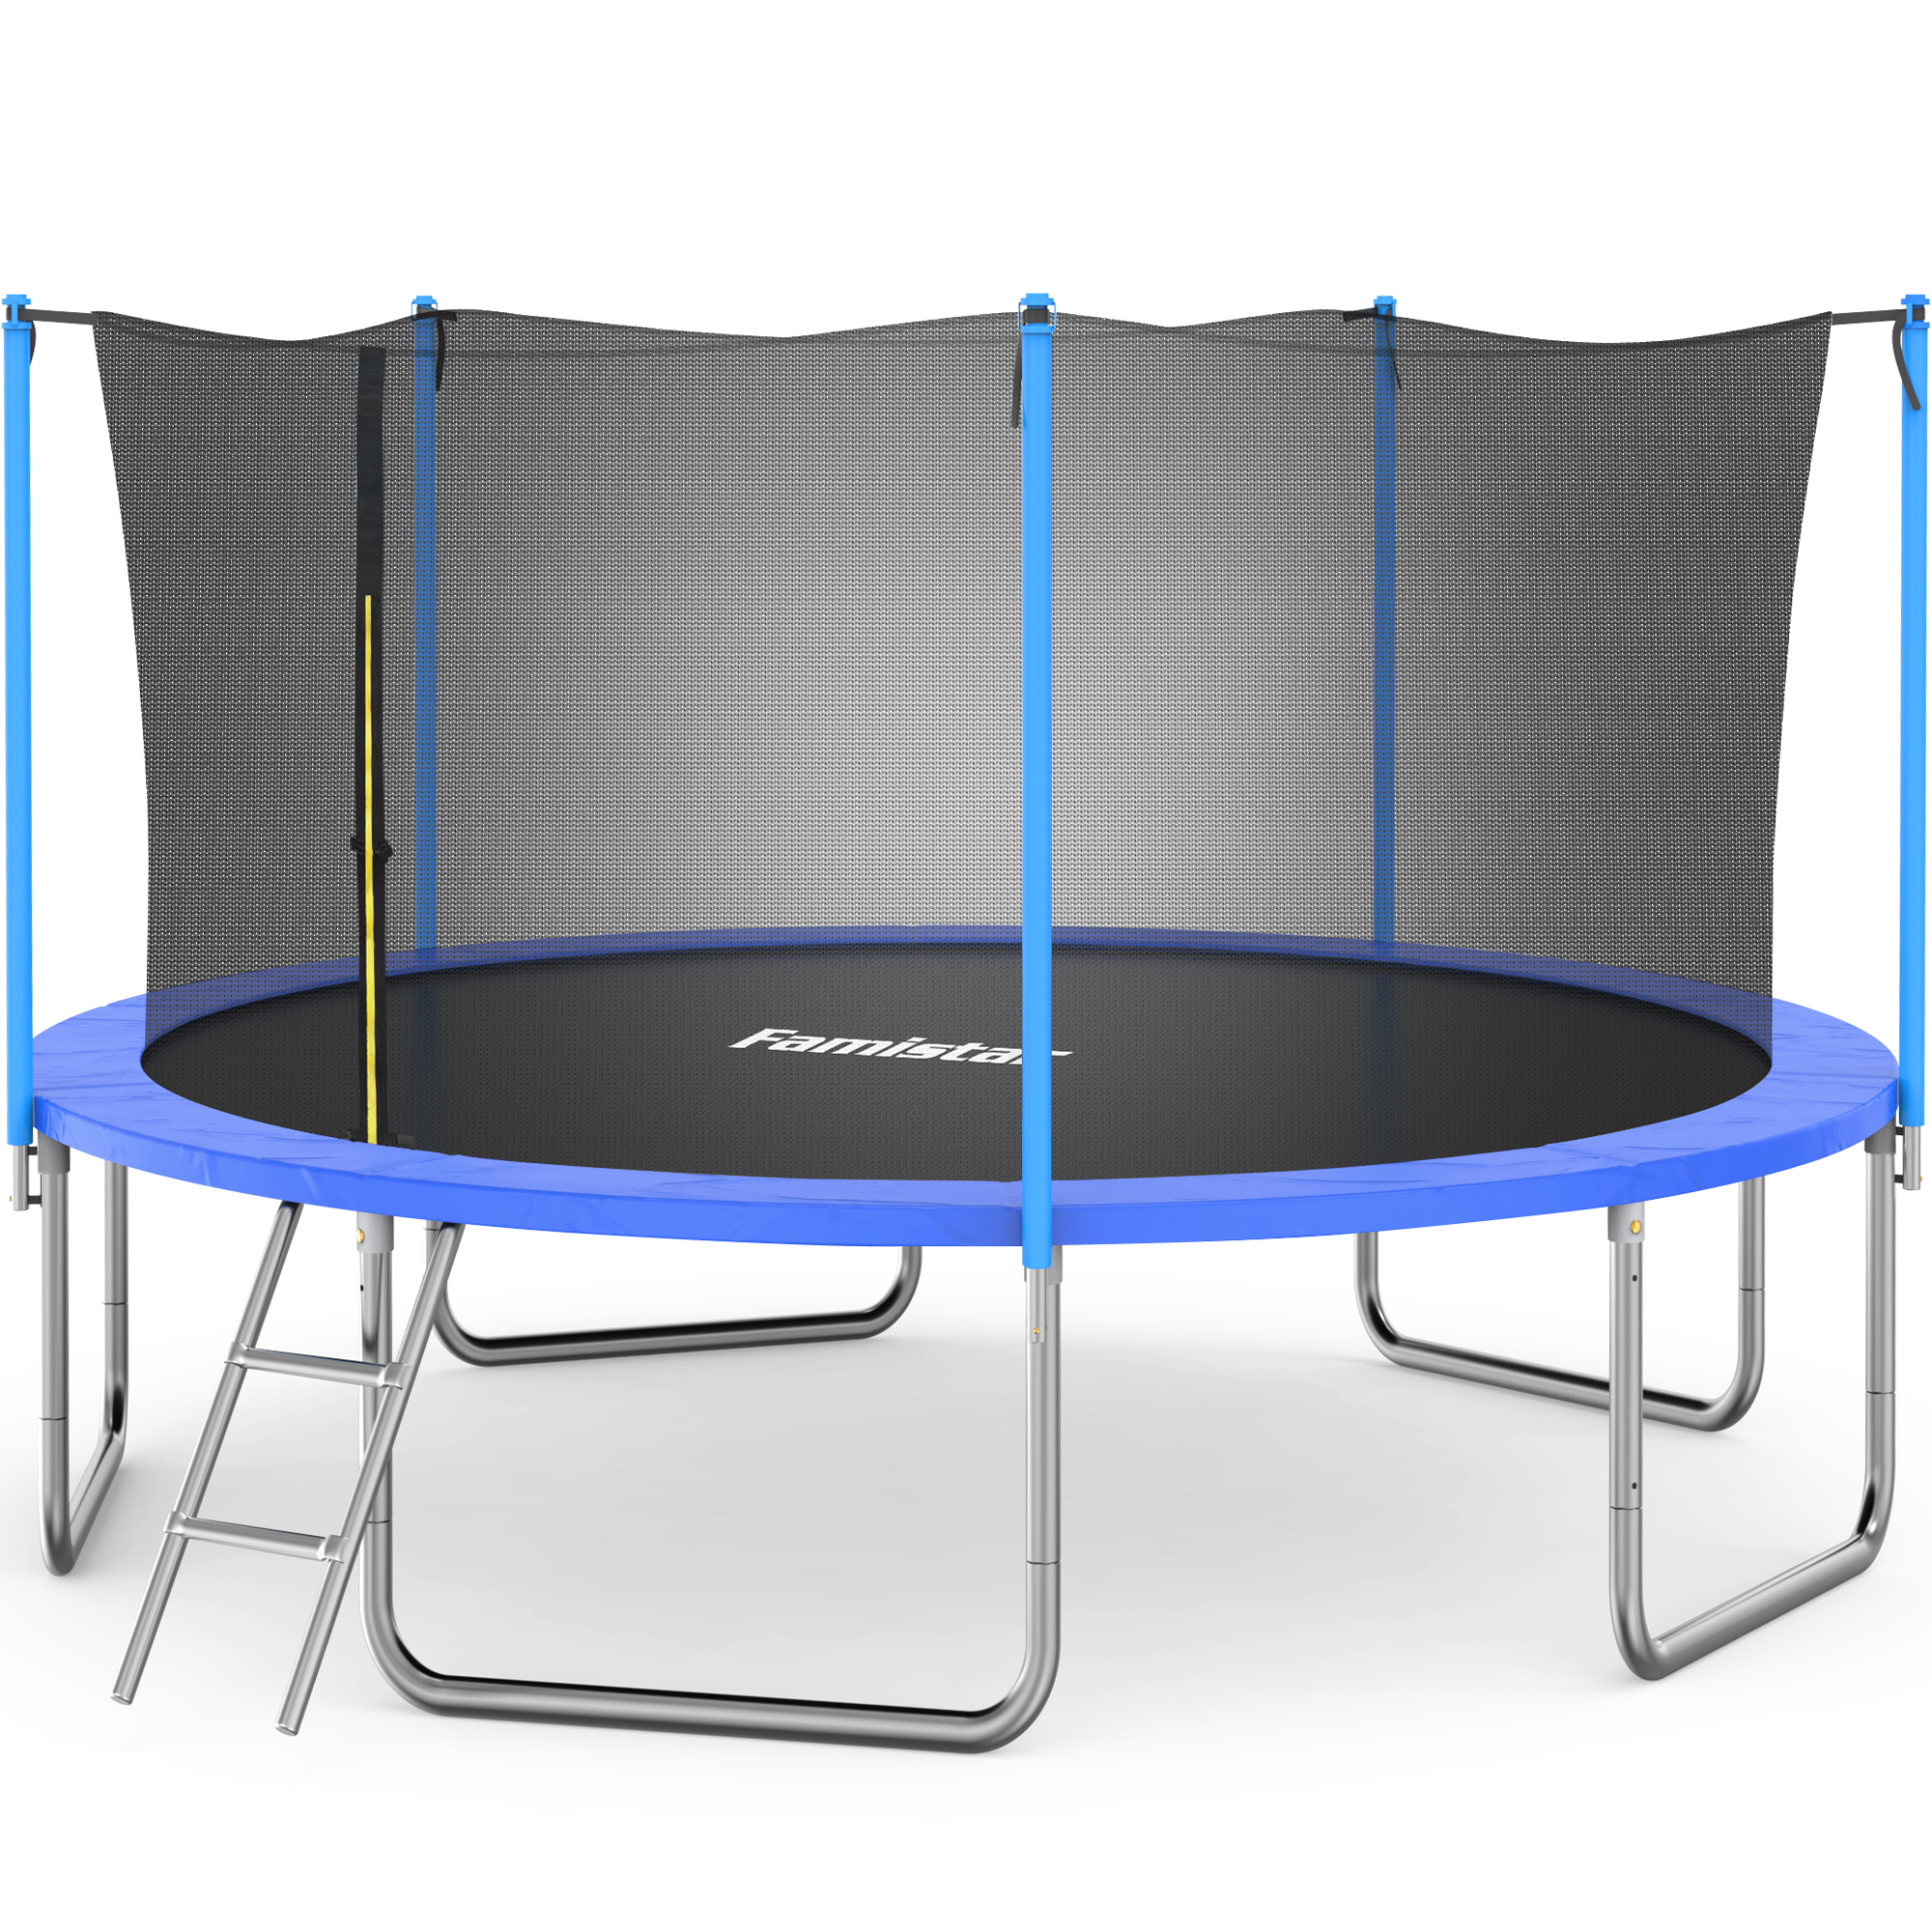 Famistar 15FT Trampoline, Recreational Trampoline with Safety Enclosure Net Metal Ladder Outdoor Trampoline for Kids Adults - image 1 of 10